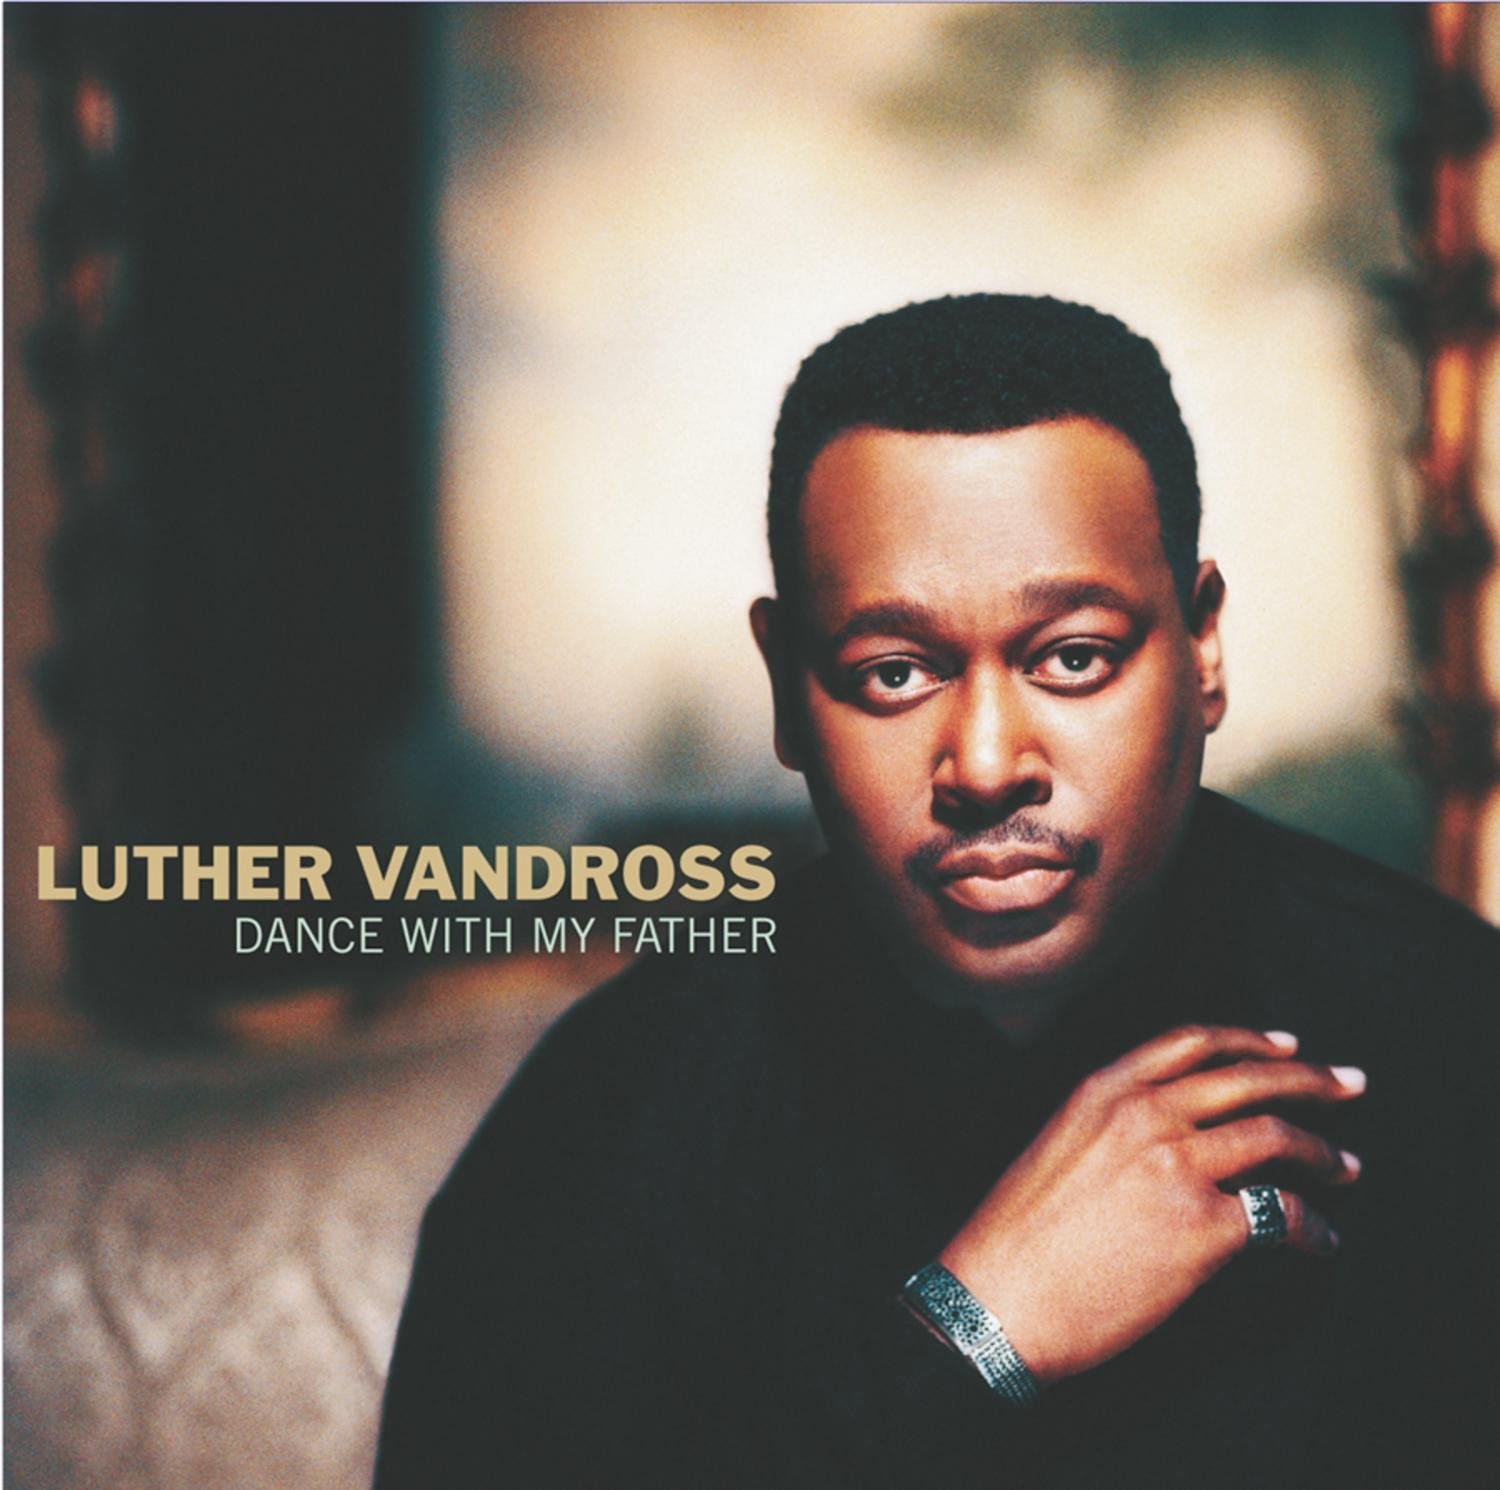 LUTHER VANDROSS APOLOGIZE